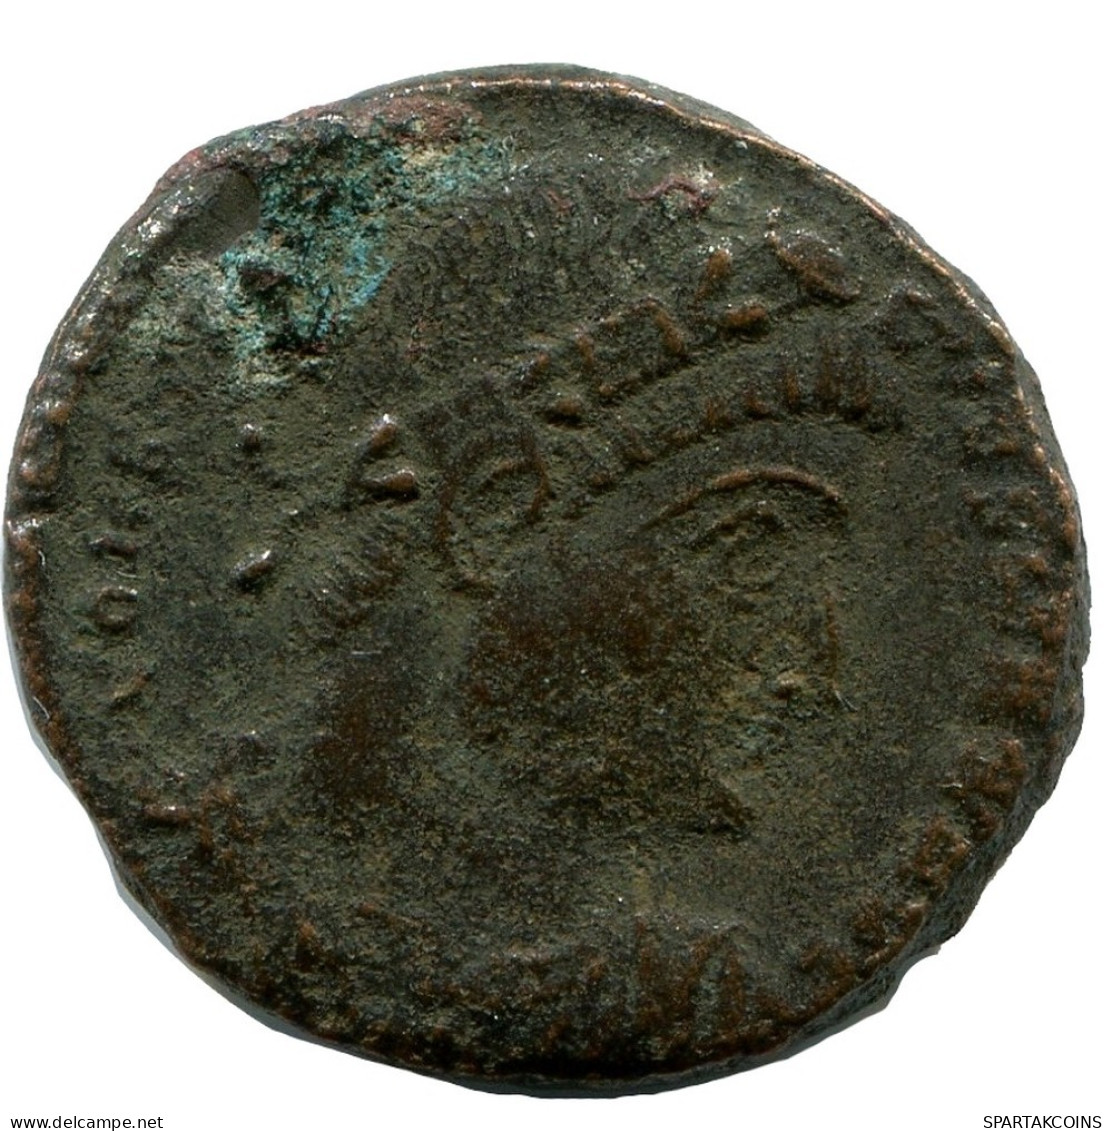 CONSTANTINE I MINTED IN ANTIOCH FOUND IN IHNASYAH HOARD EGYPT #ANC10664.14.D.A - The Christian Empire (307 AD To 363 AD)